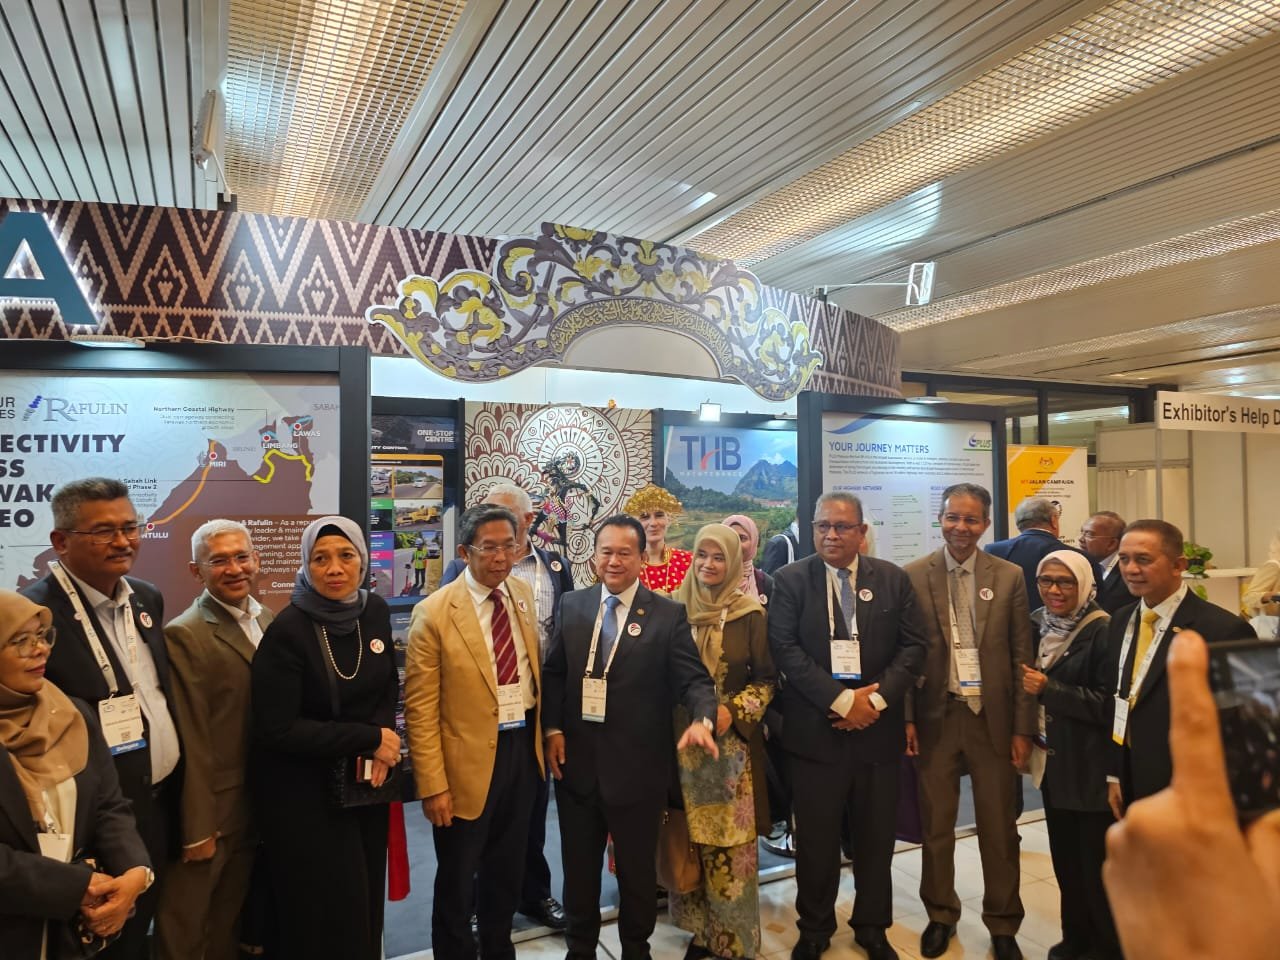  Minister of works, YB Dato Sri Alexander Nanta Linggi (middle) at the Malaysia Pavilion during the opening ceremony.&nbsp; 